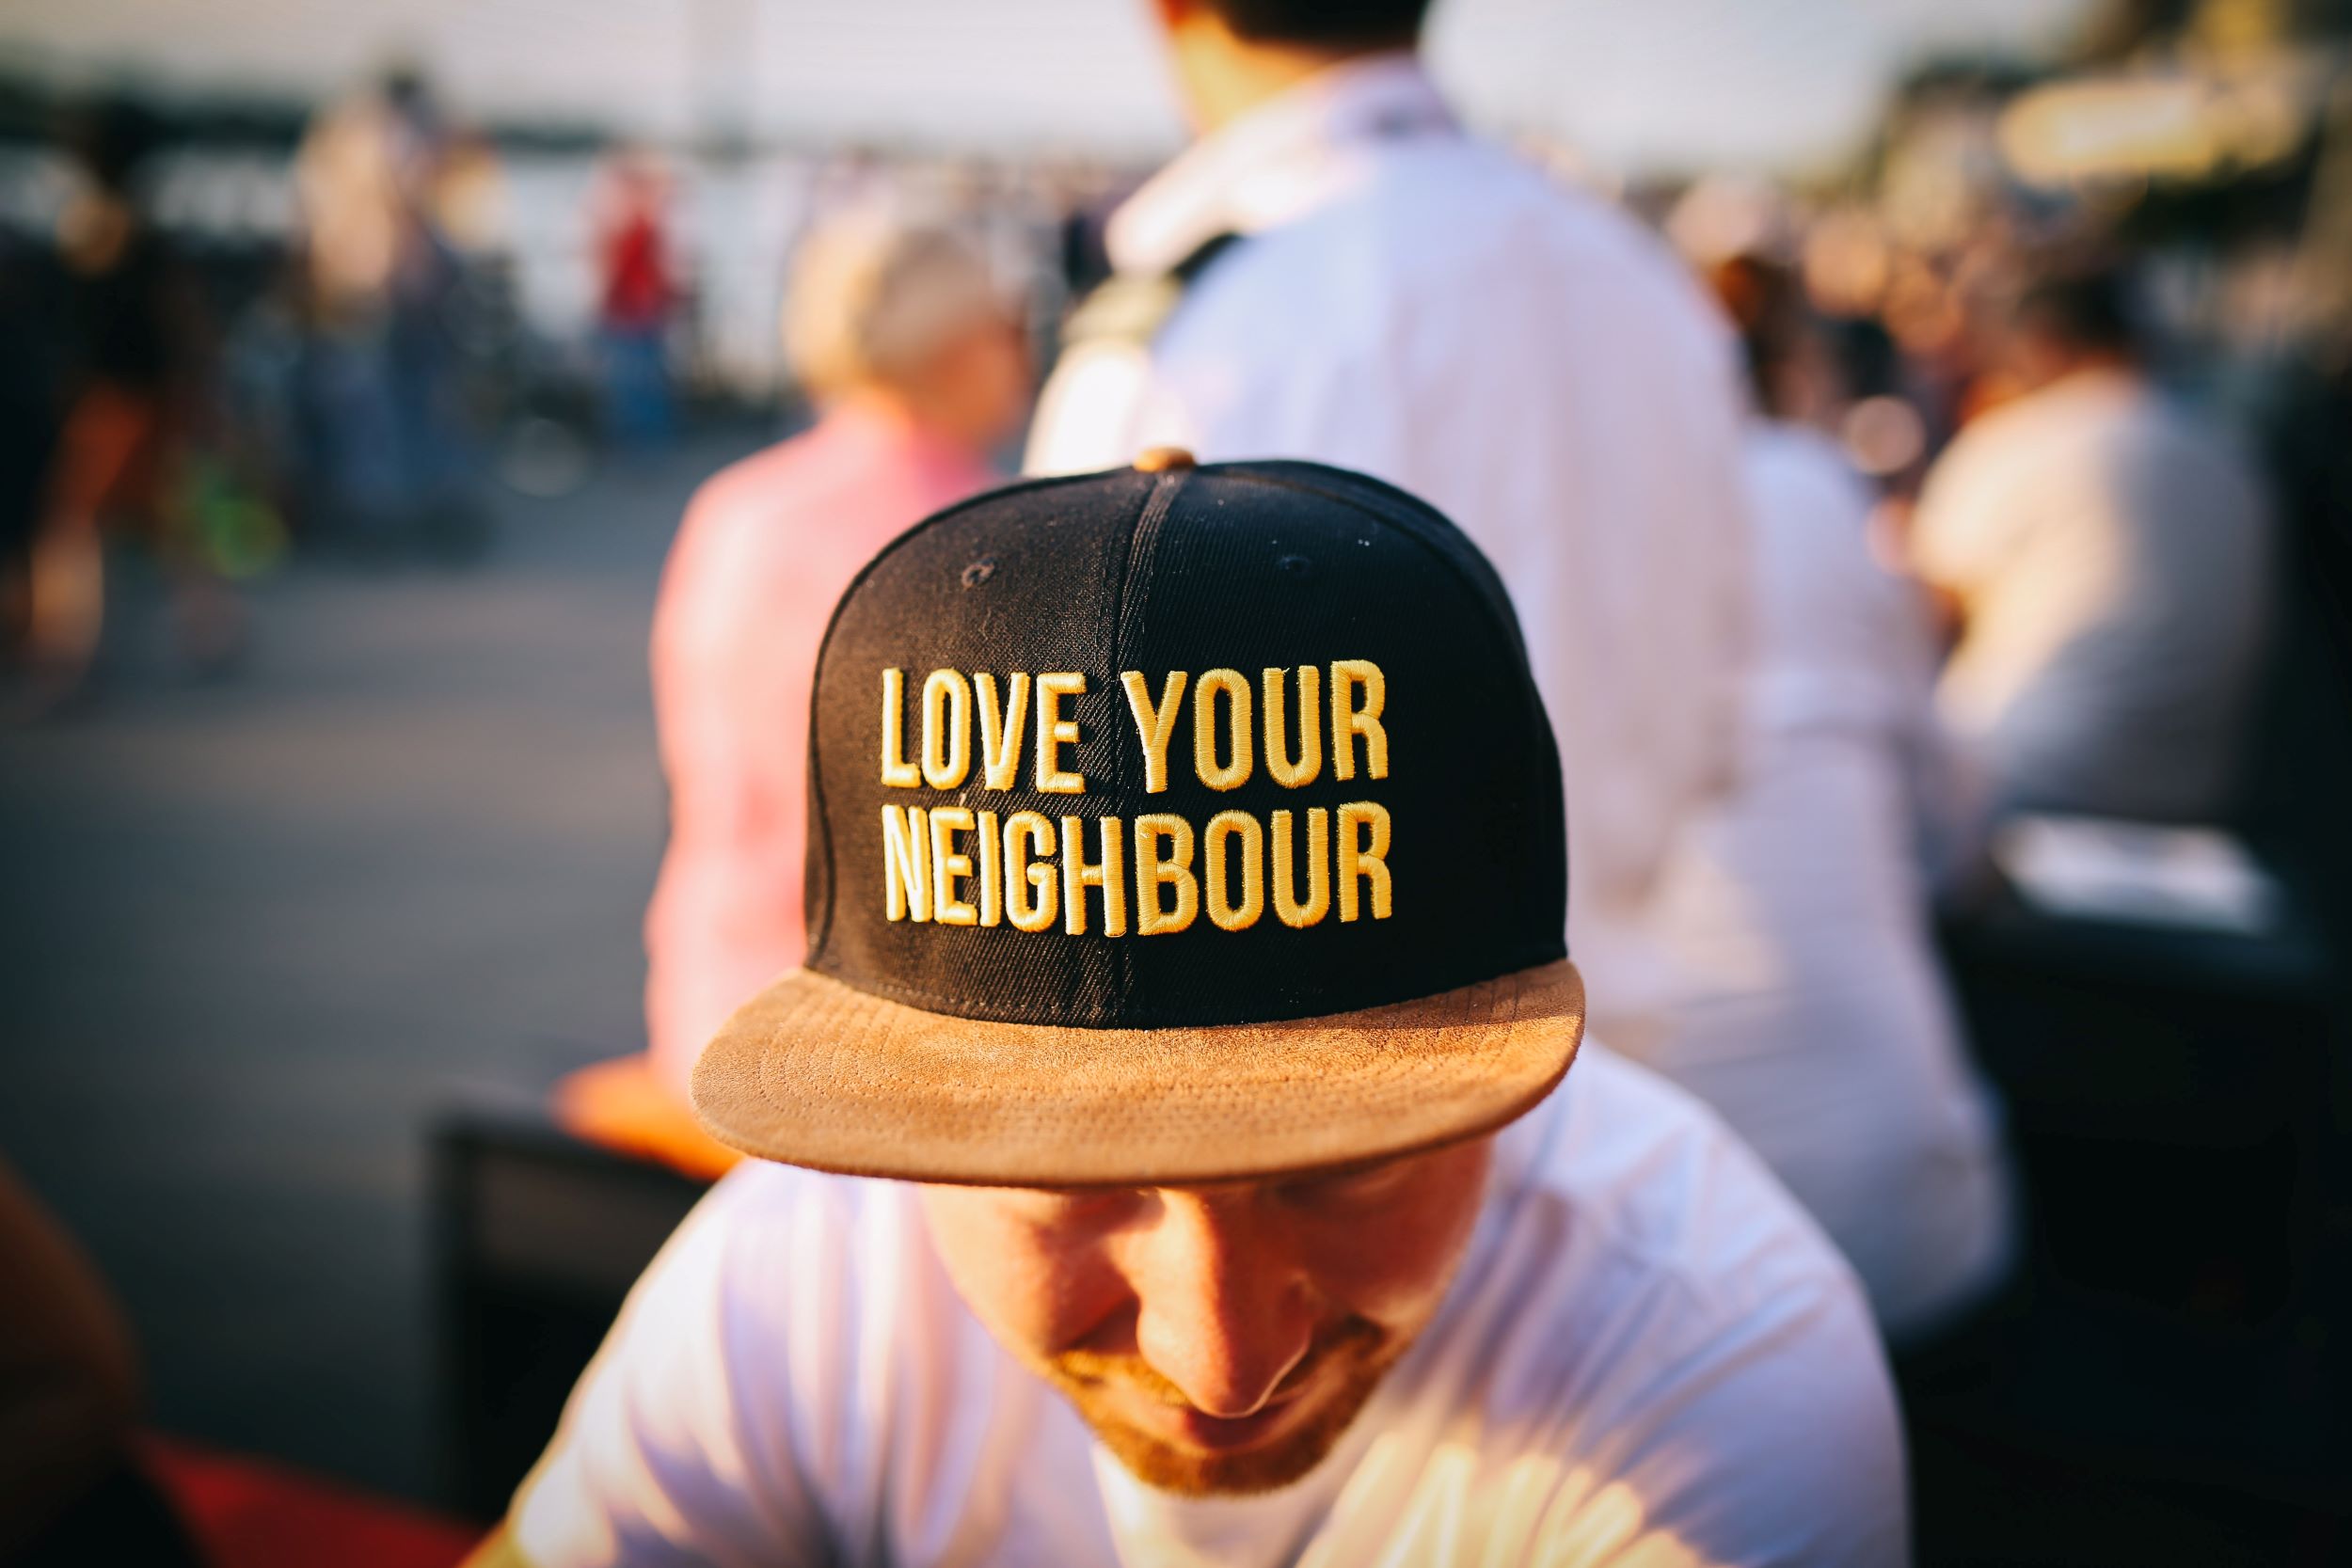 man in hat that says "love your neighbor"